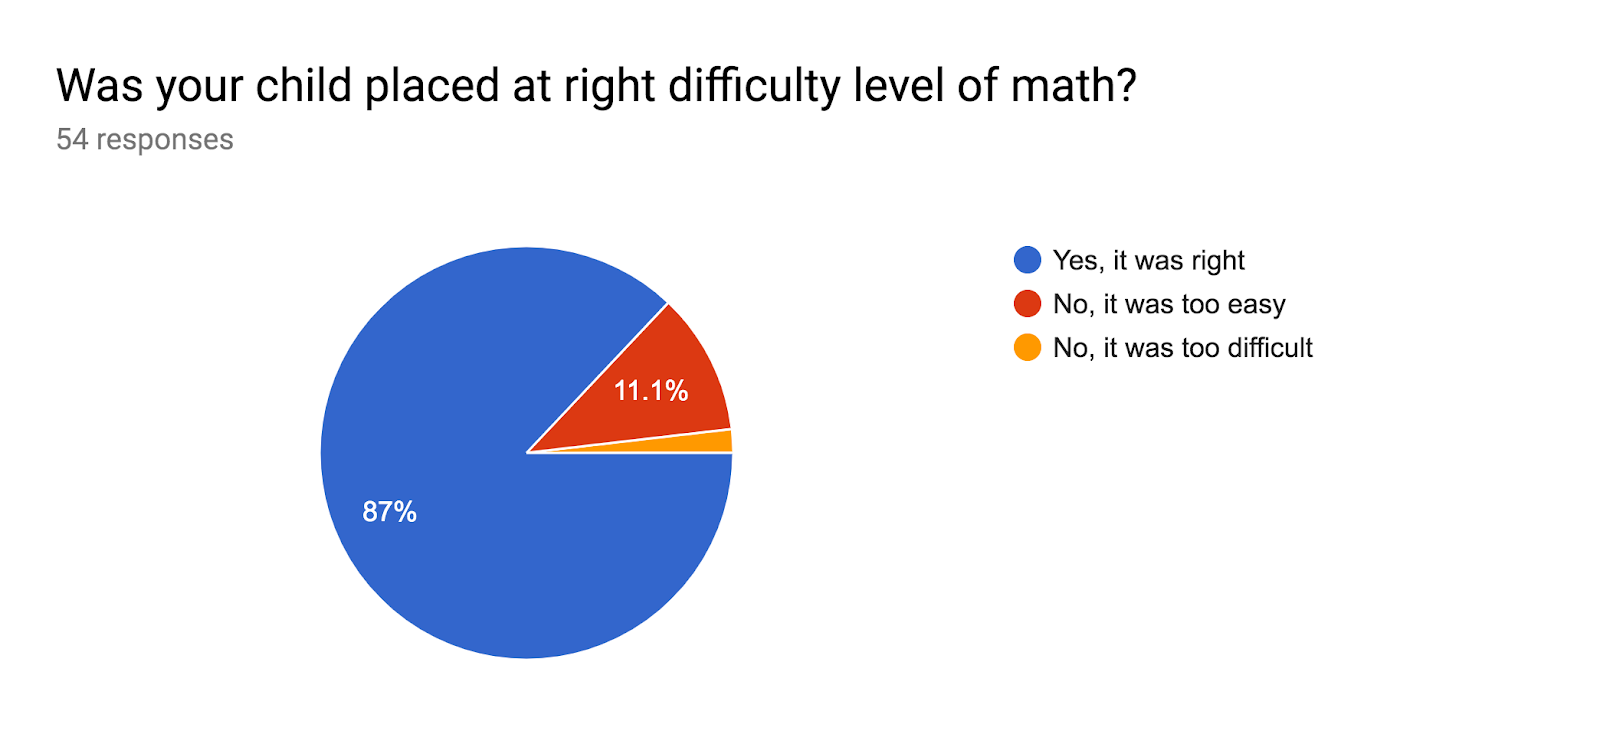 Forms response chart. Question title: Was your child placed at right difficulty level of math?. Number of responses: 54 responses.